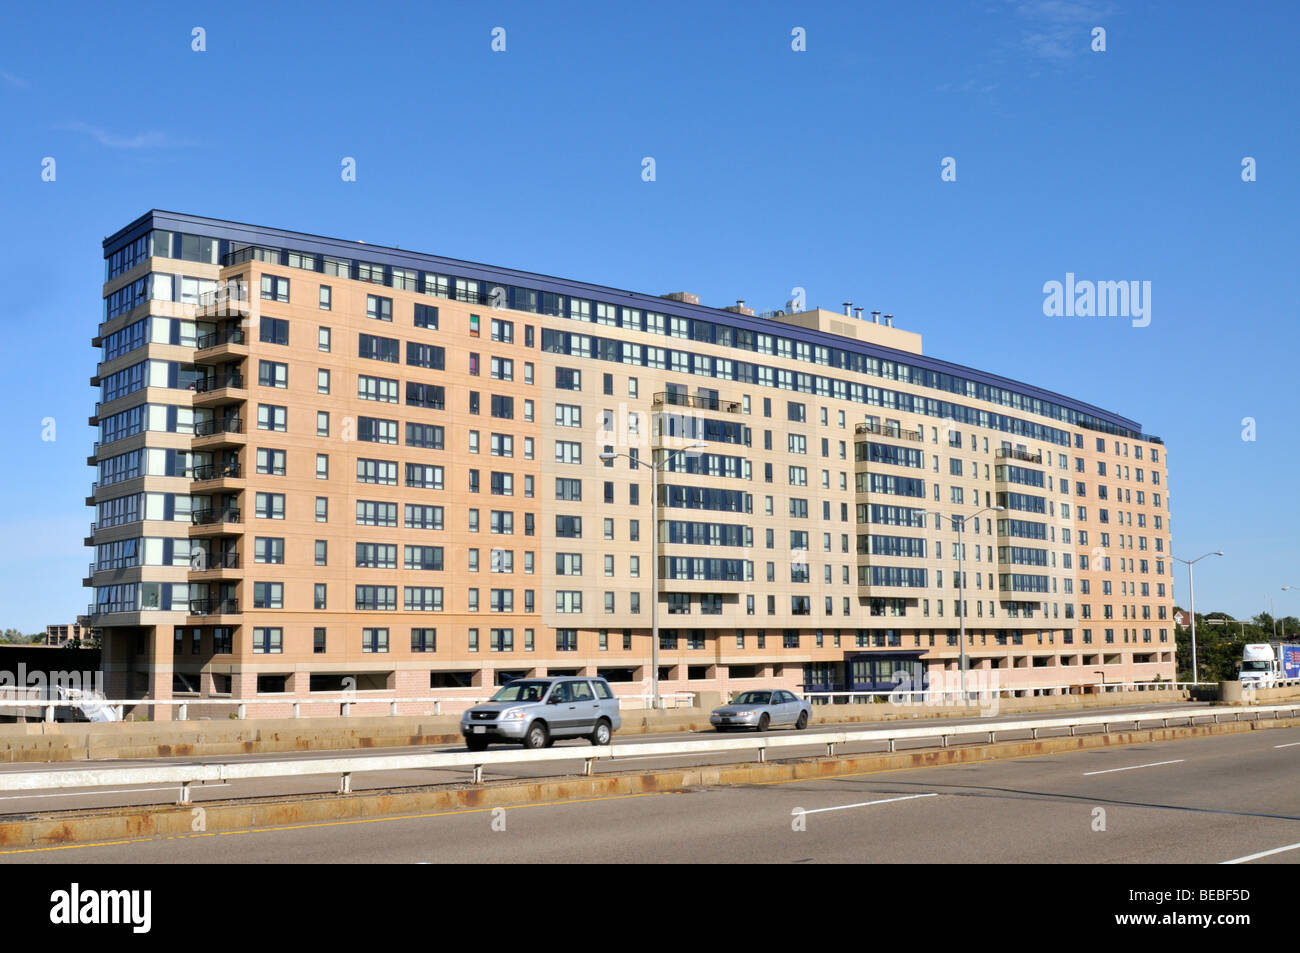 New large modern apartment building next to highway on a clear blue sky day in Quincy, Massachusetts Stock Photo